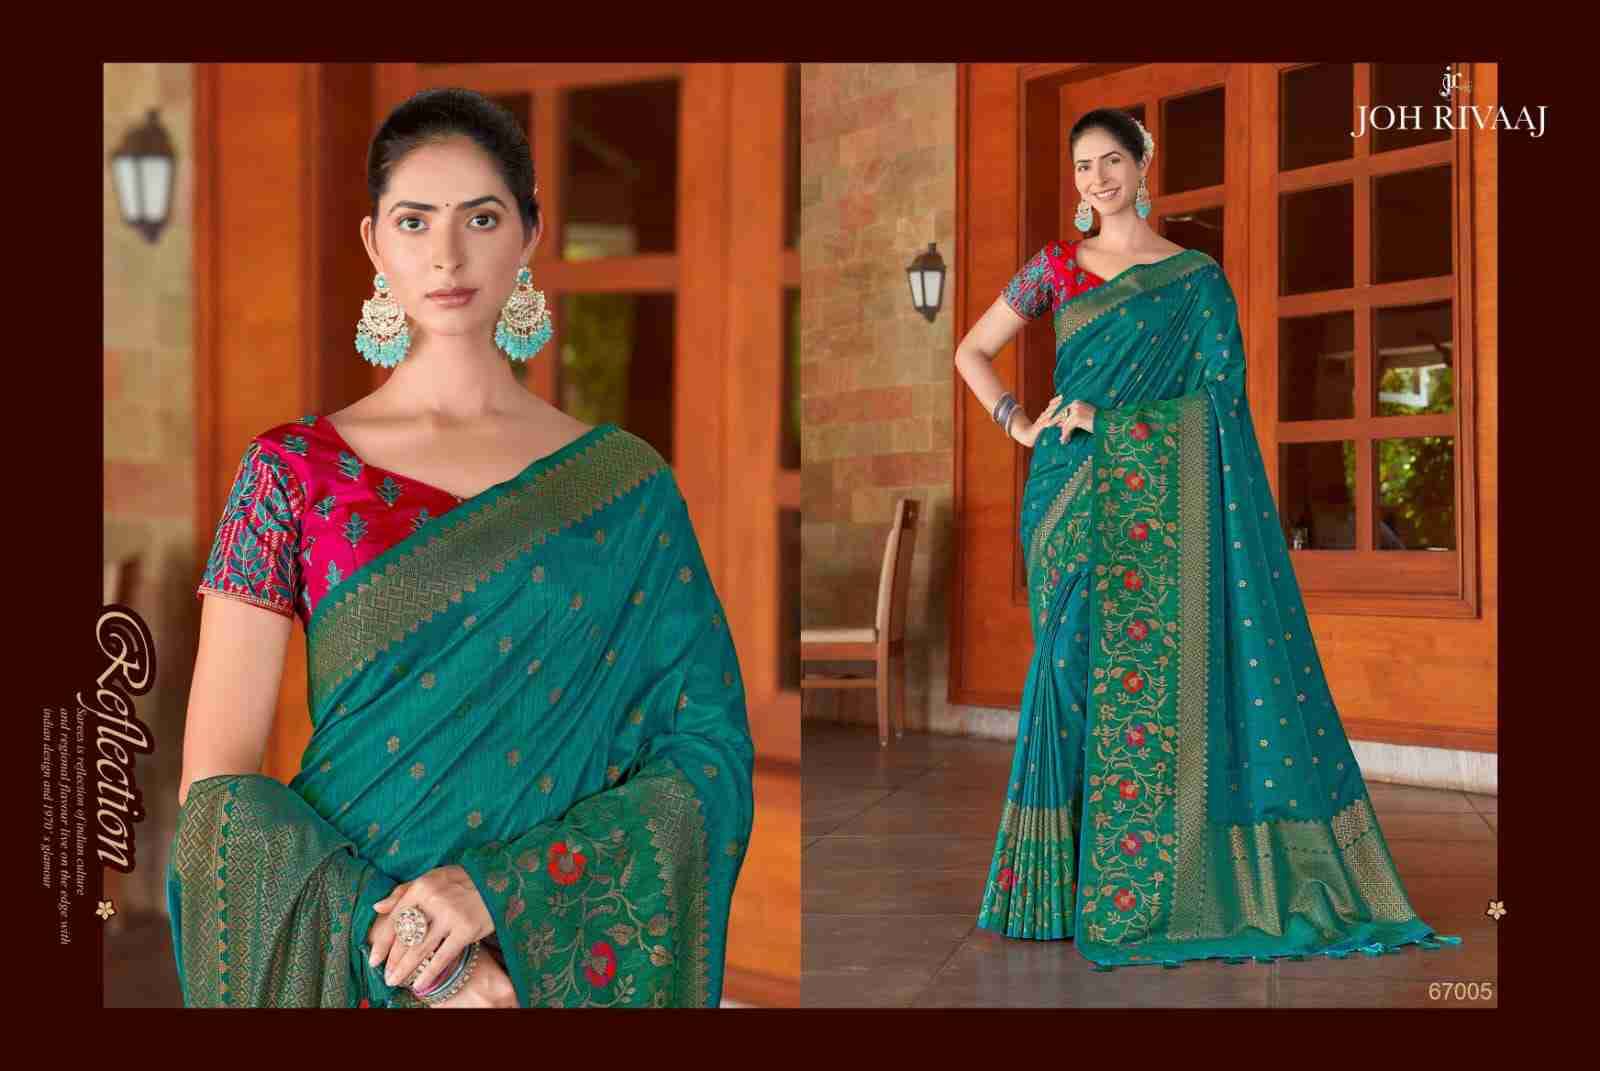 Jahida By Joh Rivaaj 67001 To 67009 Series Indian Traditional Wear Collection Beautiful Stylish Fancy Colorful Party Wear & Occasional Wear Silk Sarees At Wholesale Price